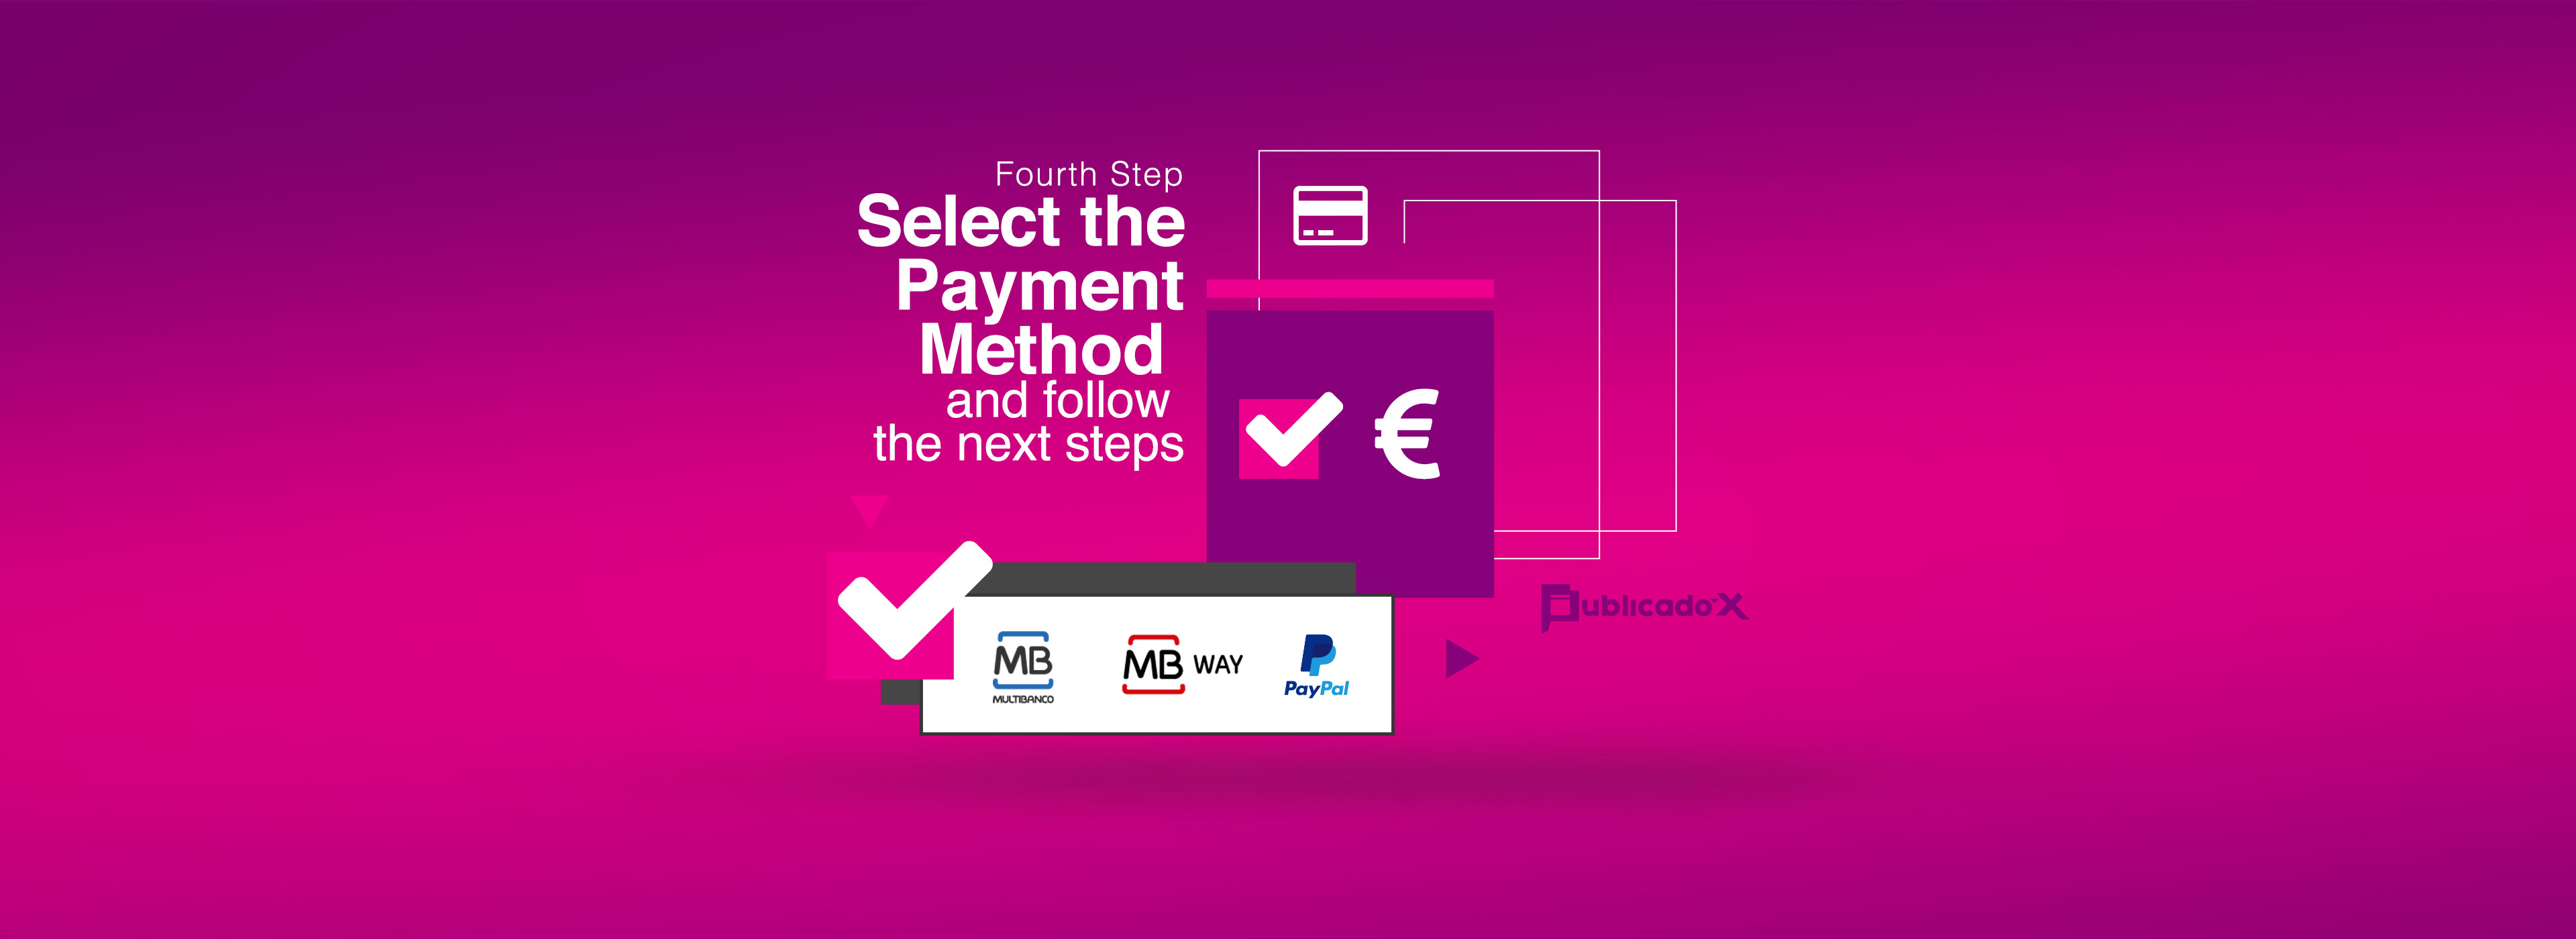 Step 4 - Choose the method and complete the payment so that the credits are added to your account.